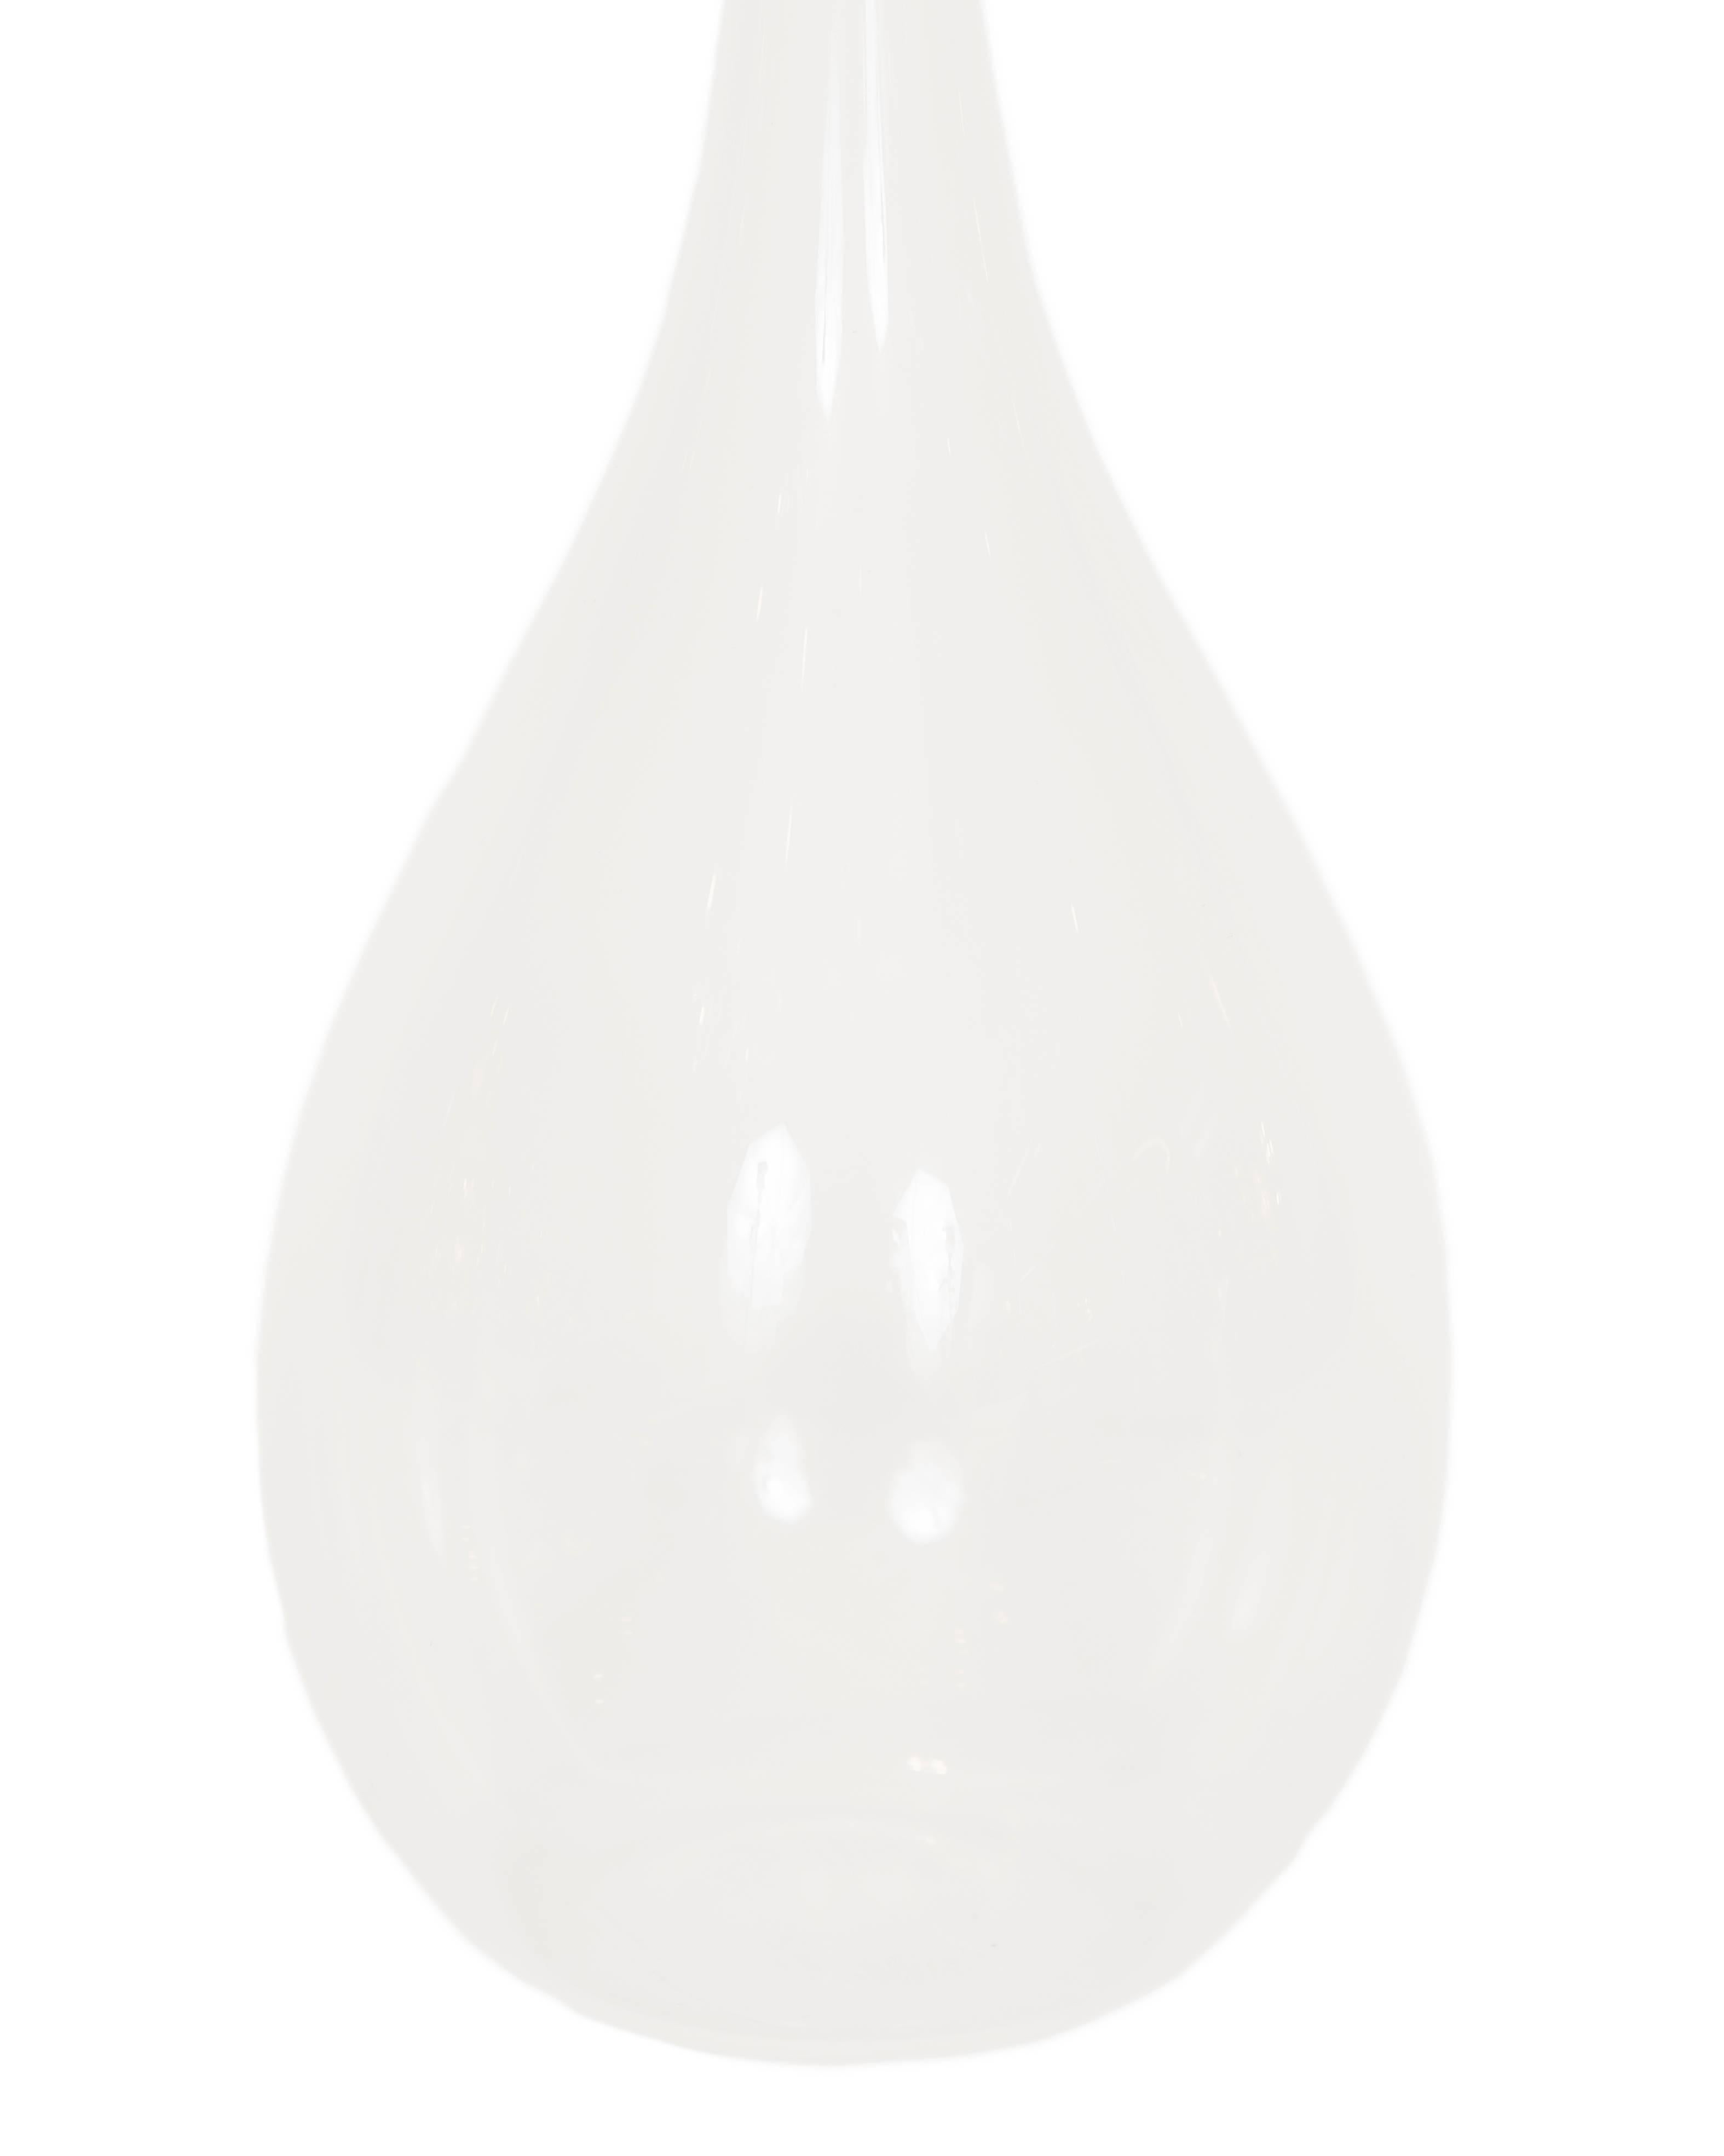 Clear and opaque or white signed vase by Floris Maydem for Leerdam glass.